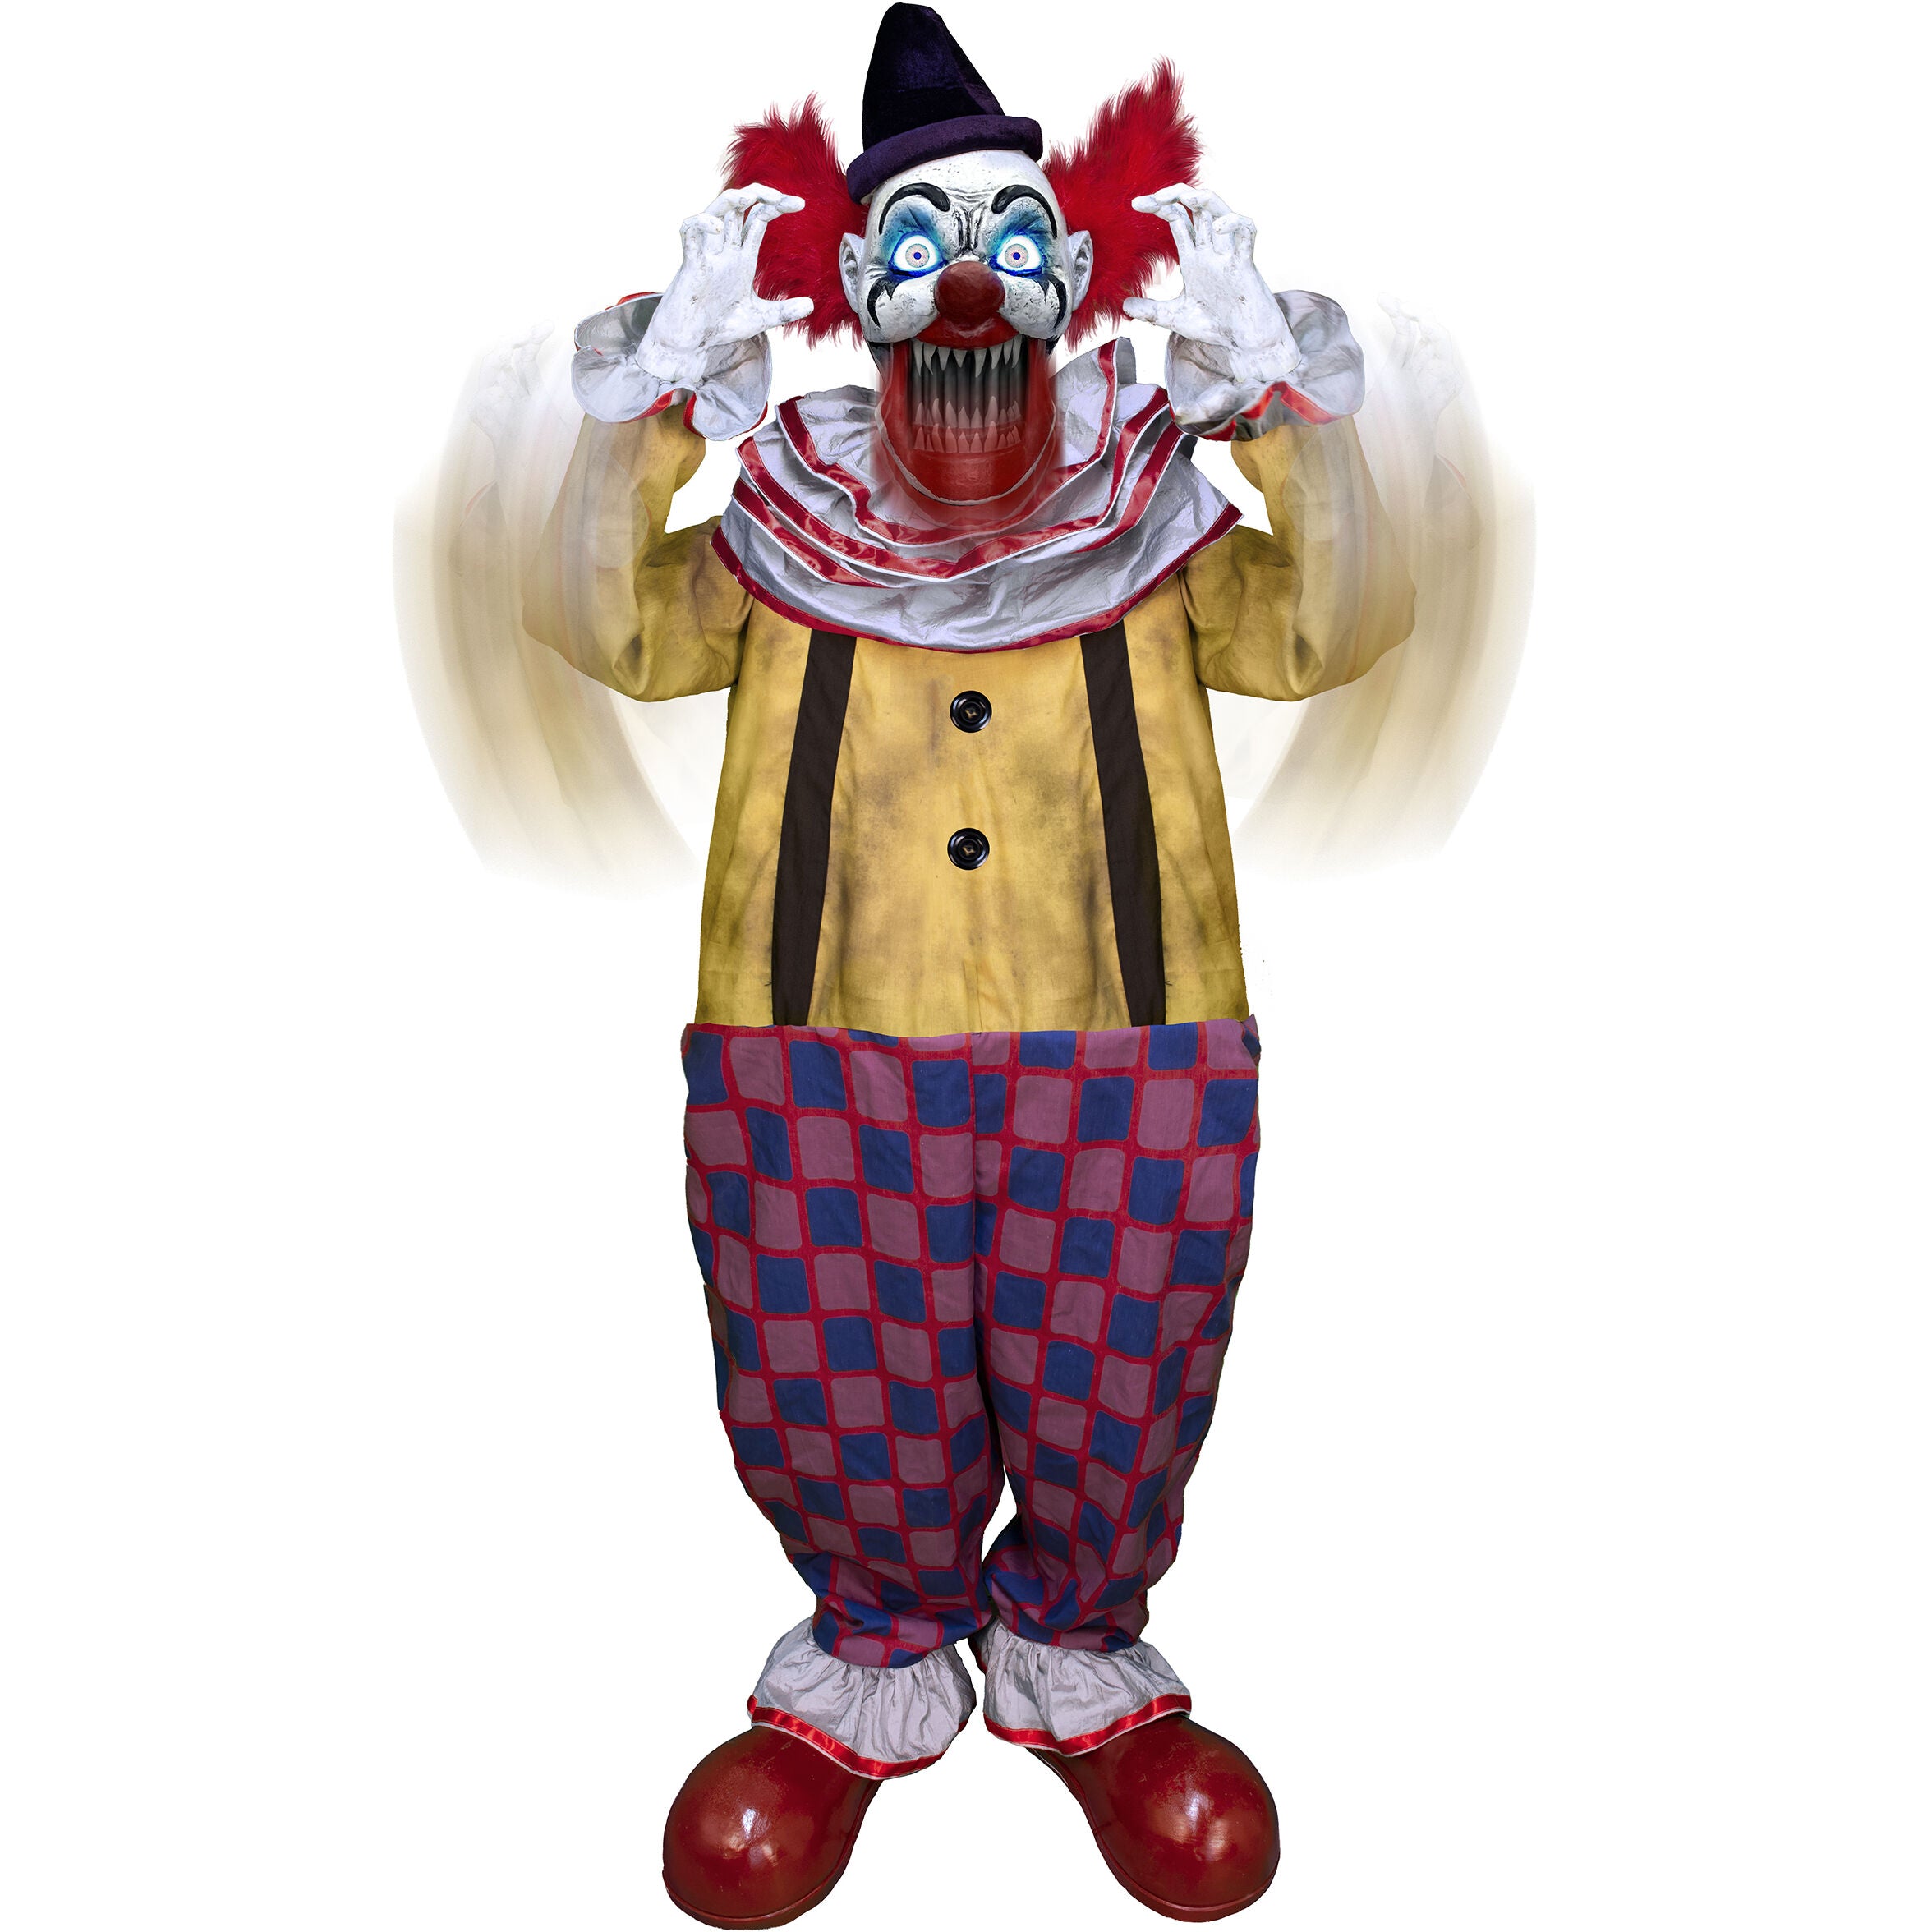 Haunted Hill Farm - Motion-Activated Startling Arms Clown by Tekky, Premium Talking Halloween Animatronic, Plug-In or Battery